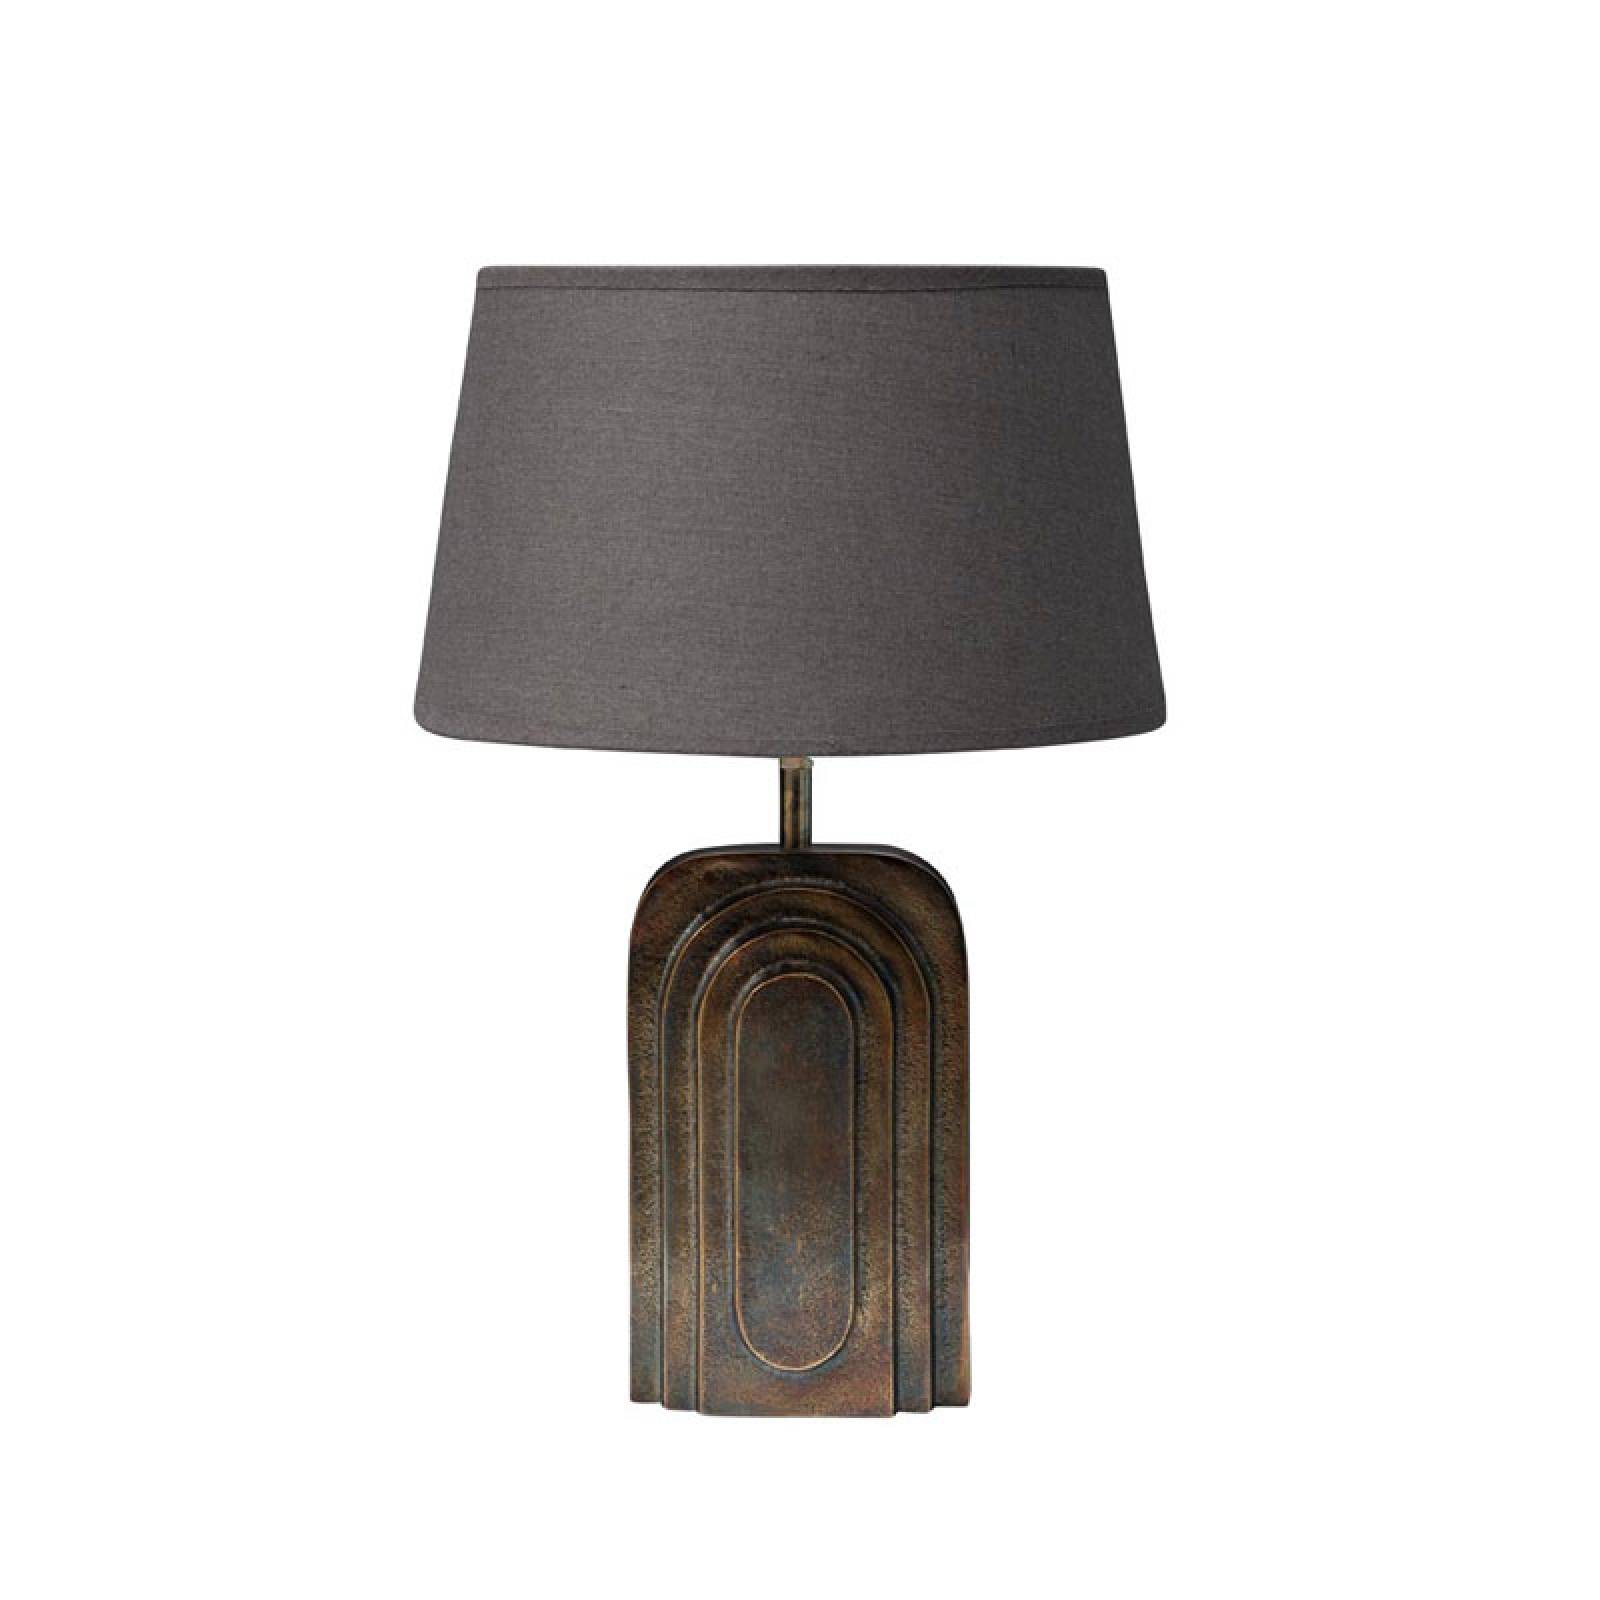 Art Deco Style Metal Gold Lamp WIth Grey Linen Shade